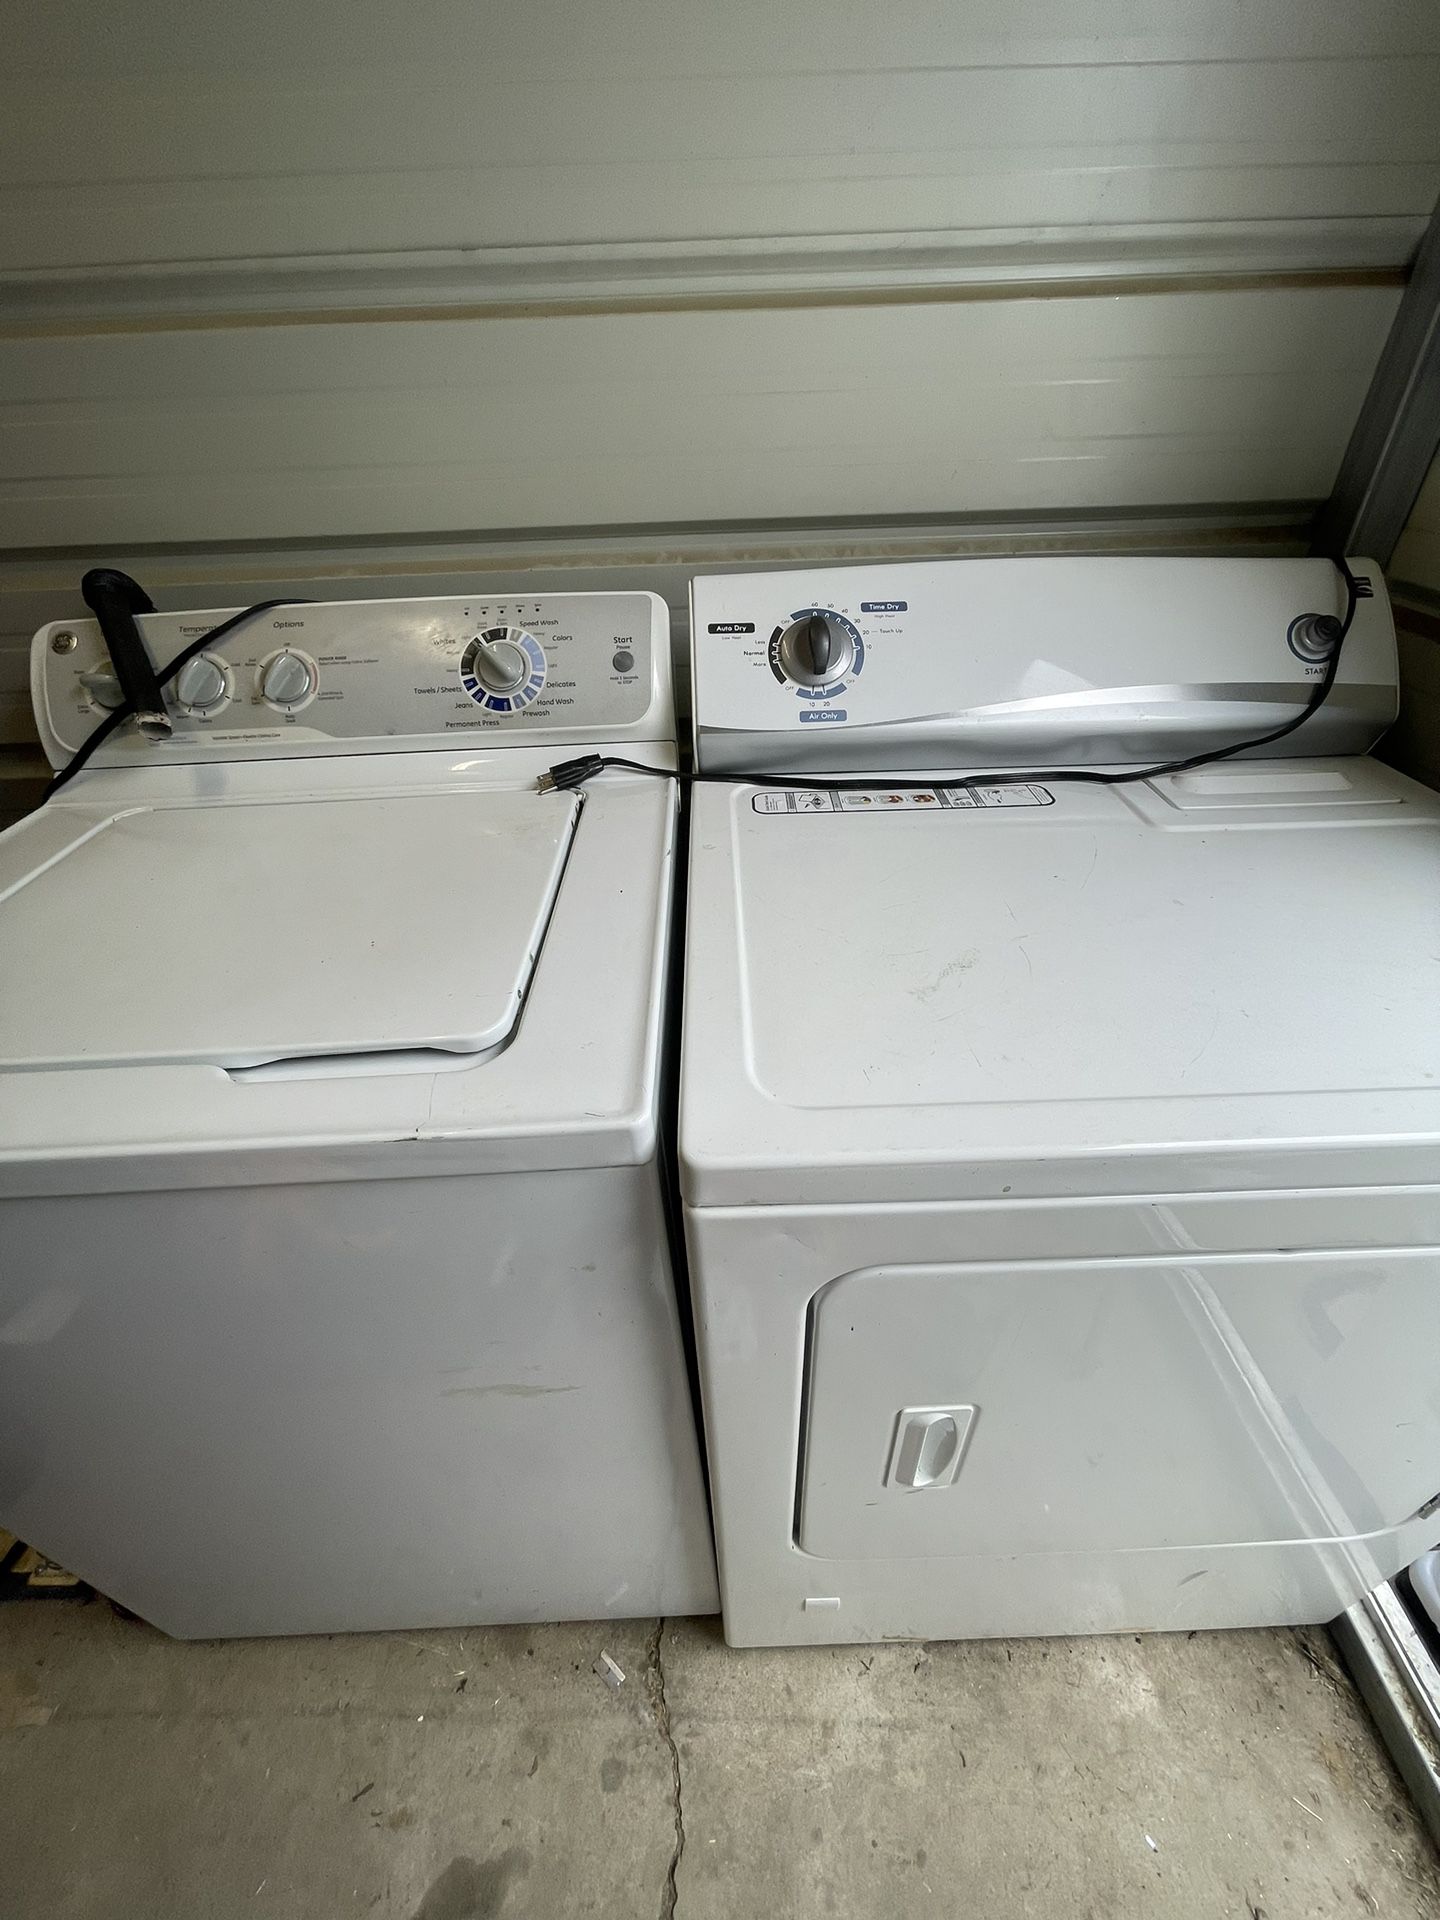 Kenmore Gas Dryer And Washer